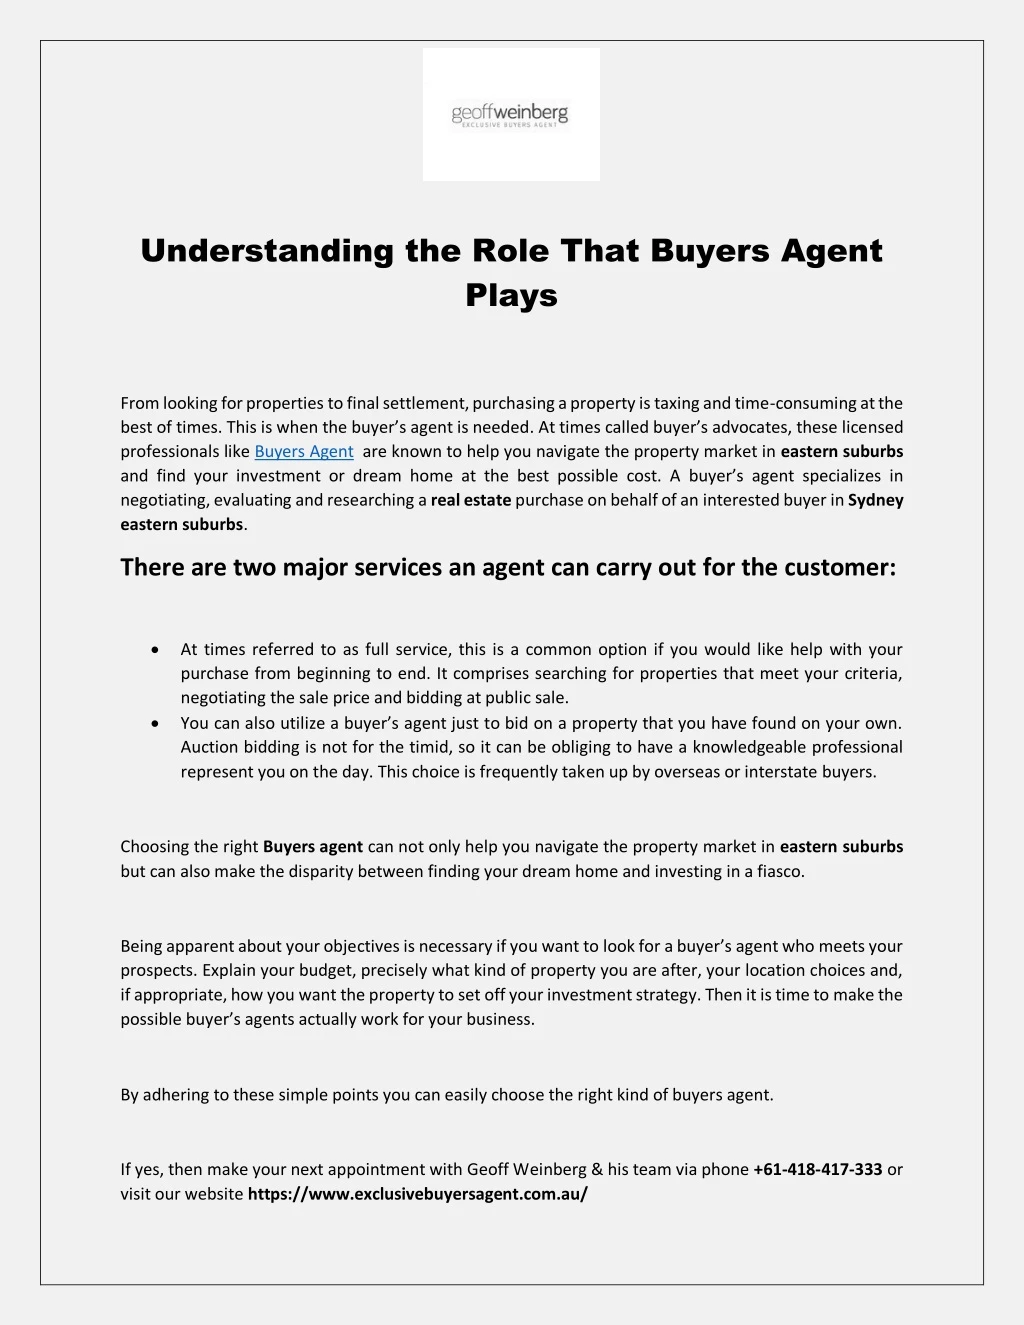 understanding the role that buyers agent plays